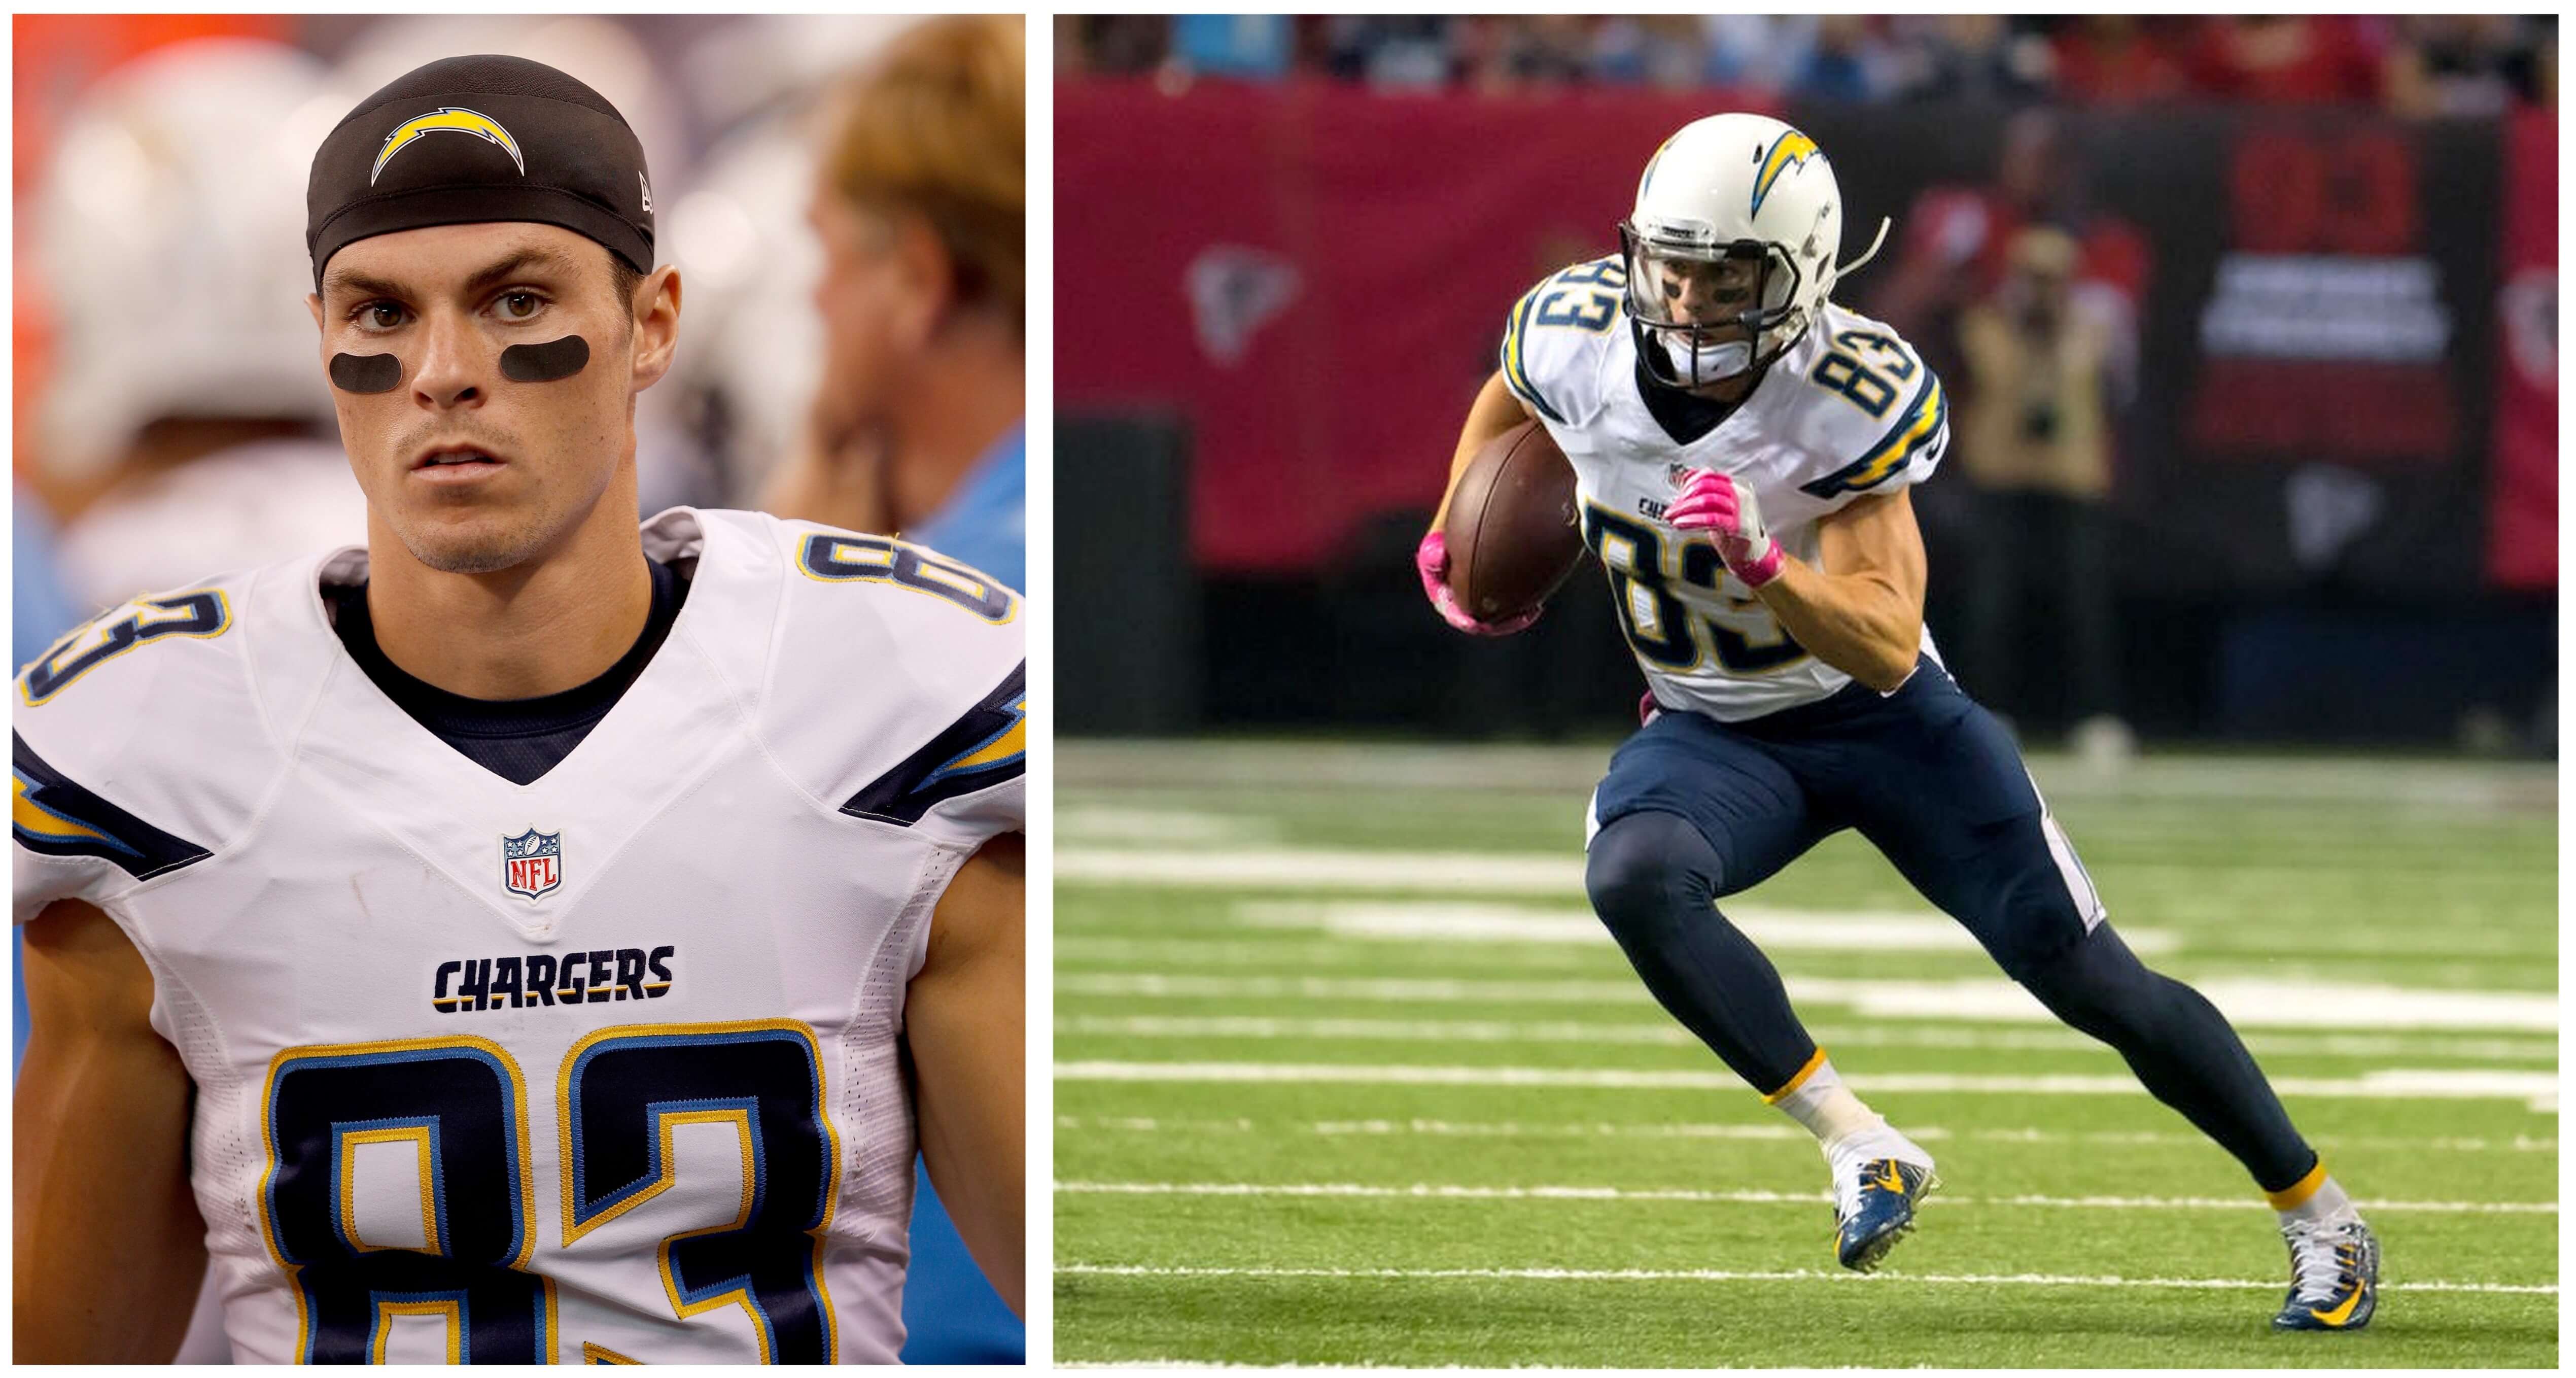 NFL Player Griff Whalen on the Perks of Being a Plant-Powered Athlete